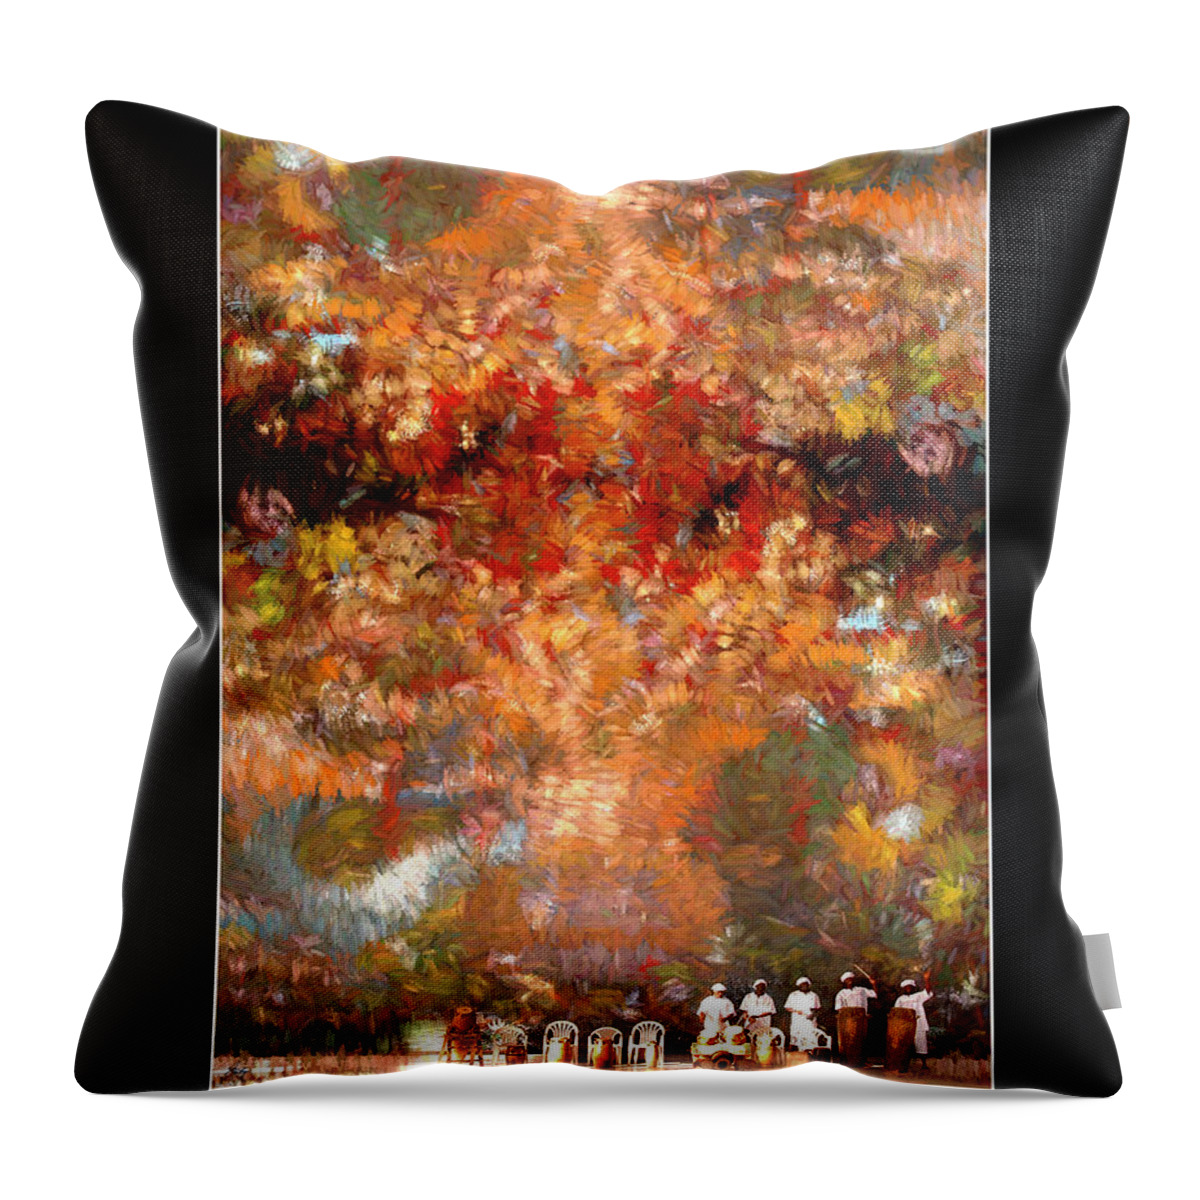 Ghana Throw Pillow featuring the photograph Drummers in a Leaf Storm Fine Art Poster by Wayne King